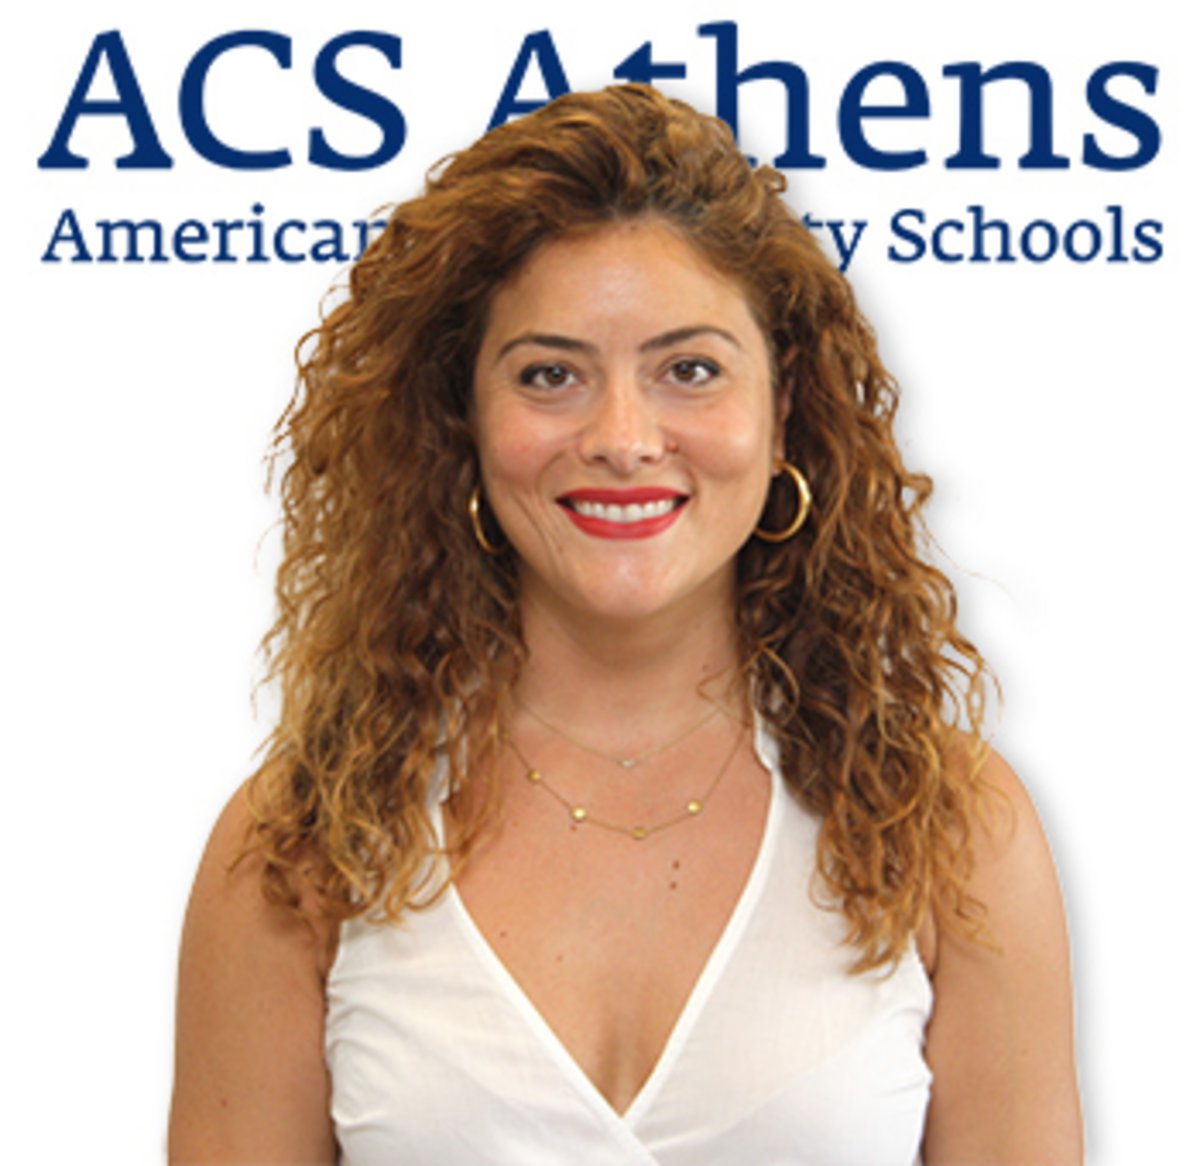 ACS Athens Modeling education for the 21st Century